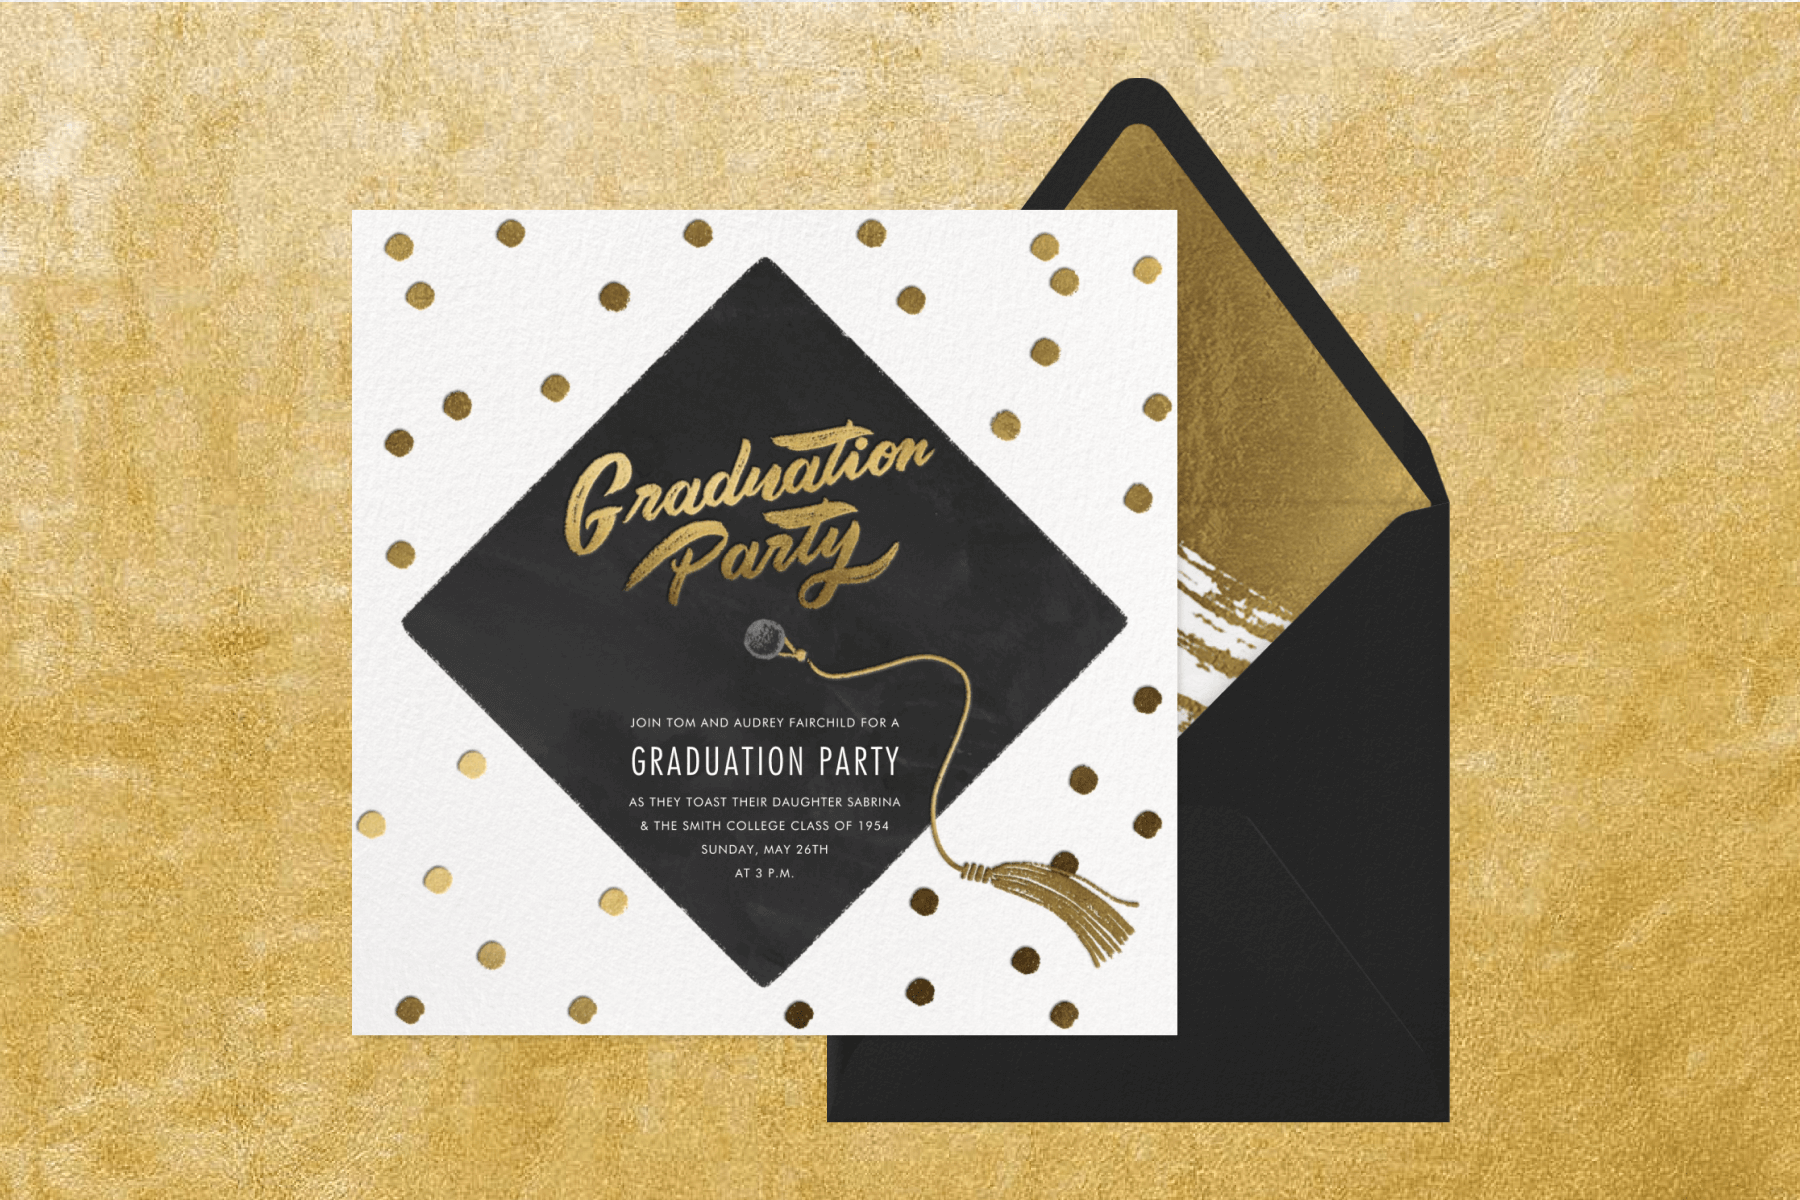 An invitation with the top of a mortarboard and gold confetti with ‘Graduation Party’ in gold script beside a black and gold envelope.